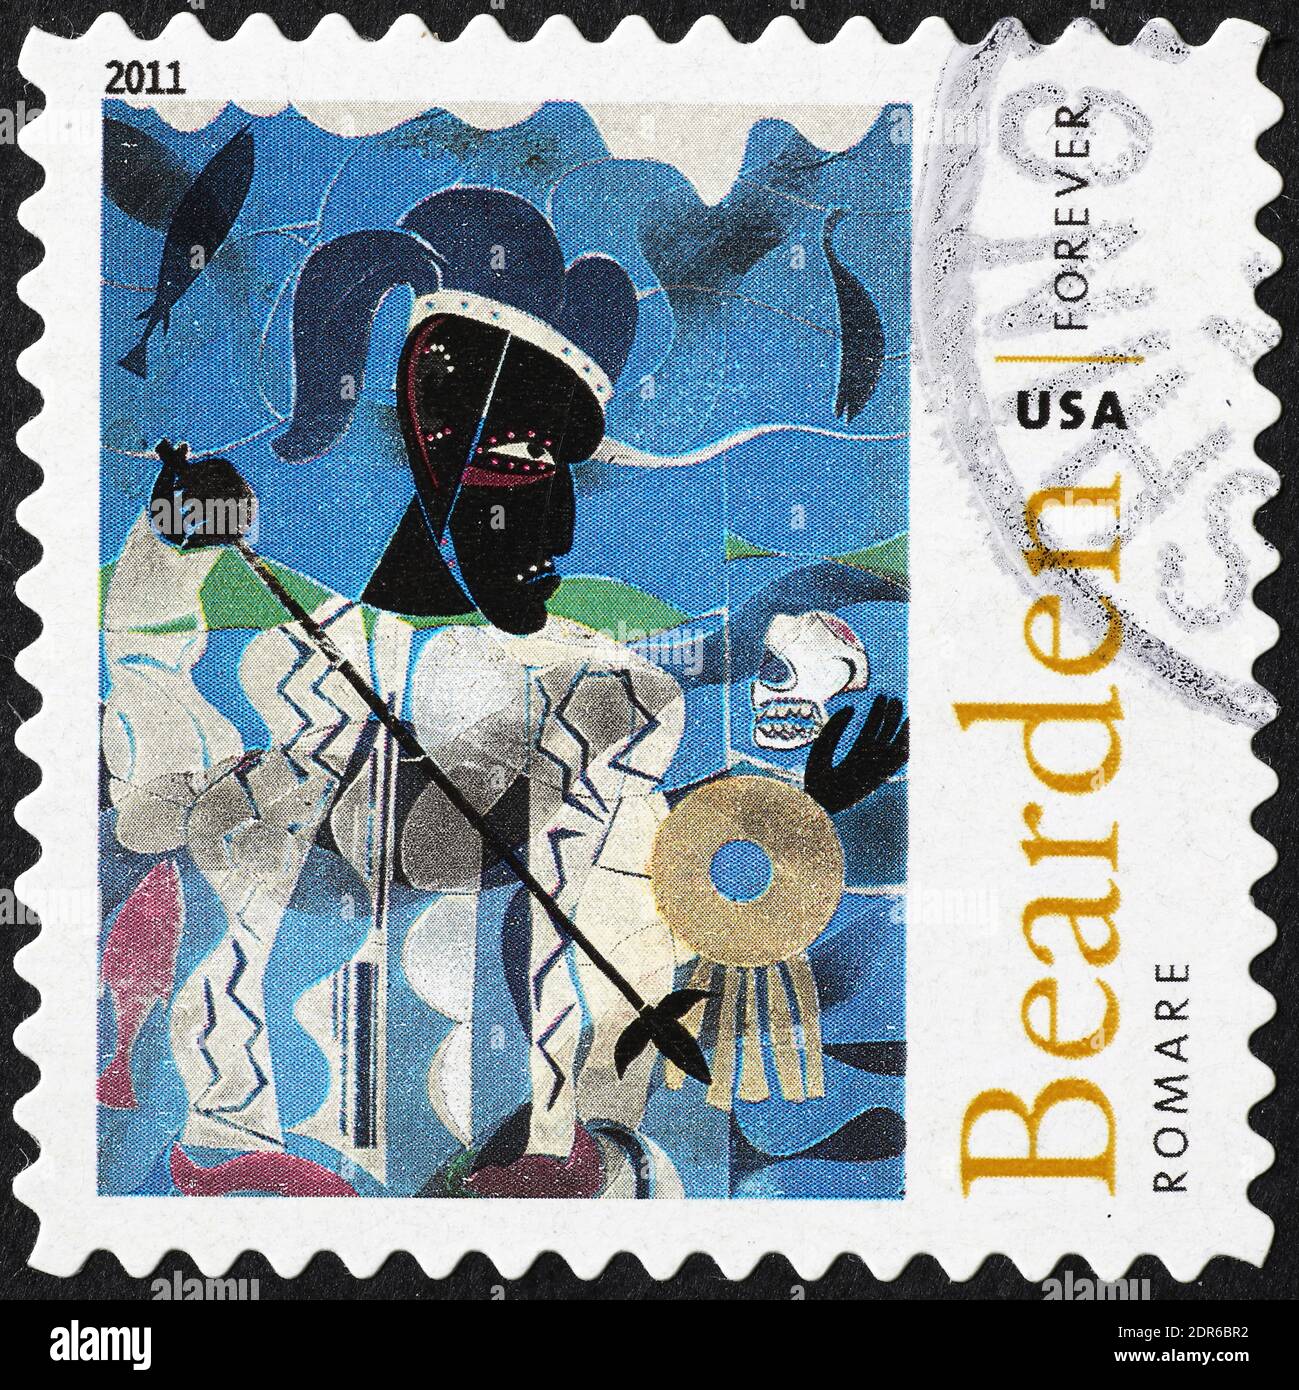 Painting by Romare Bearden on stamp Stock Photo